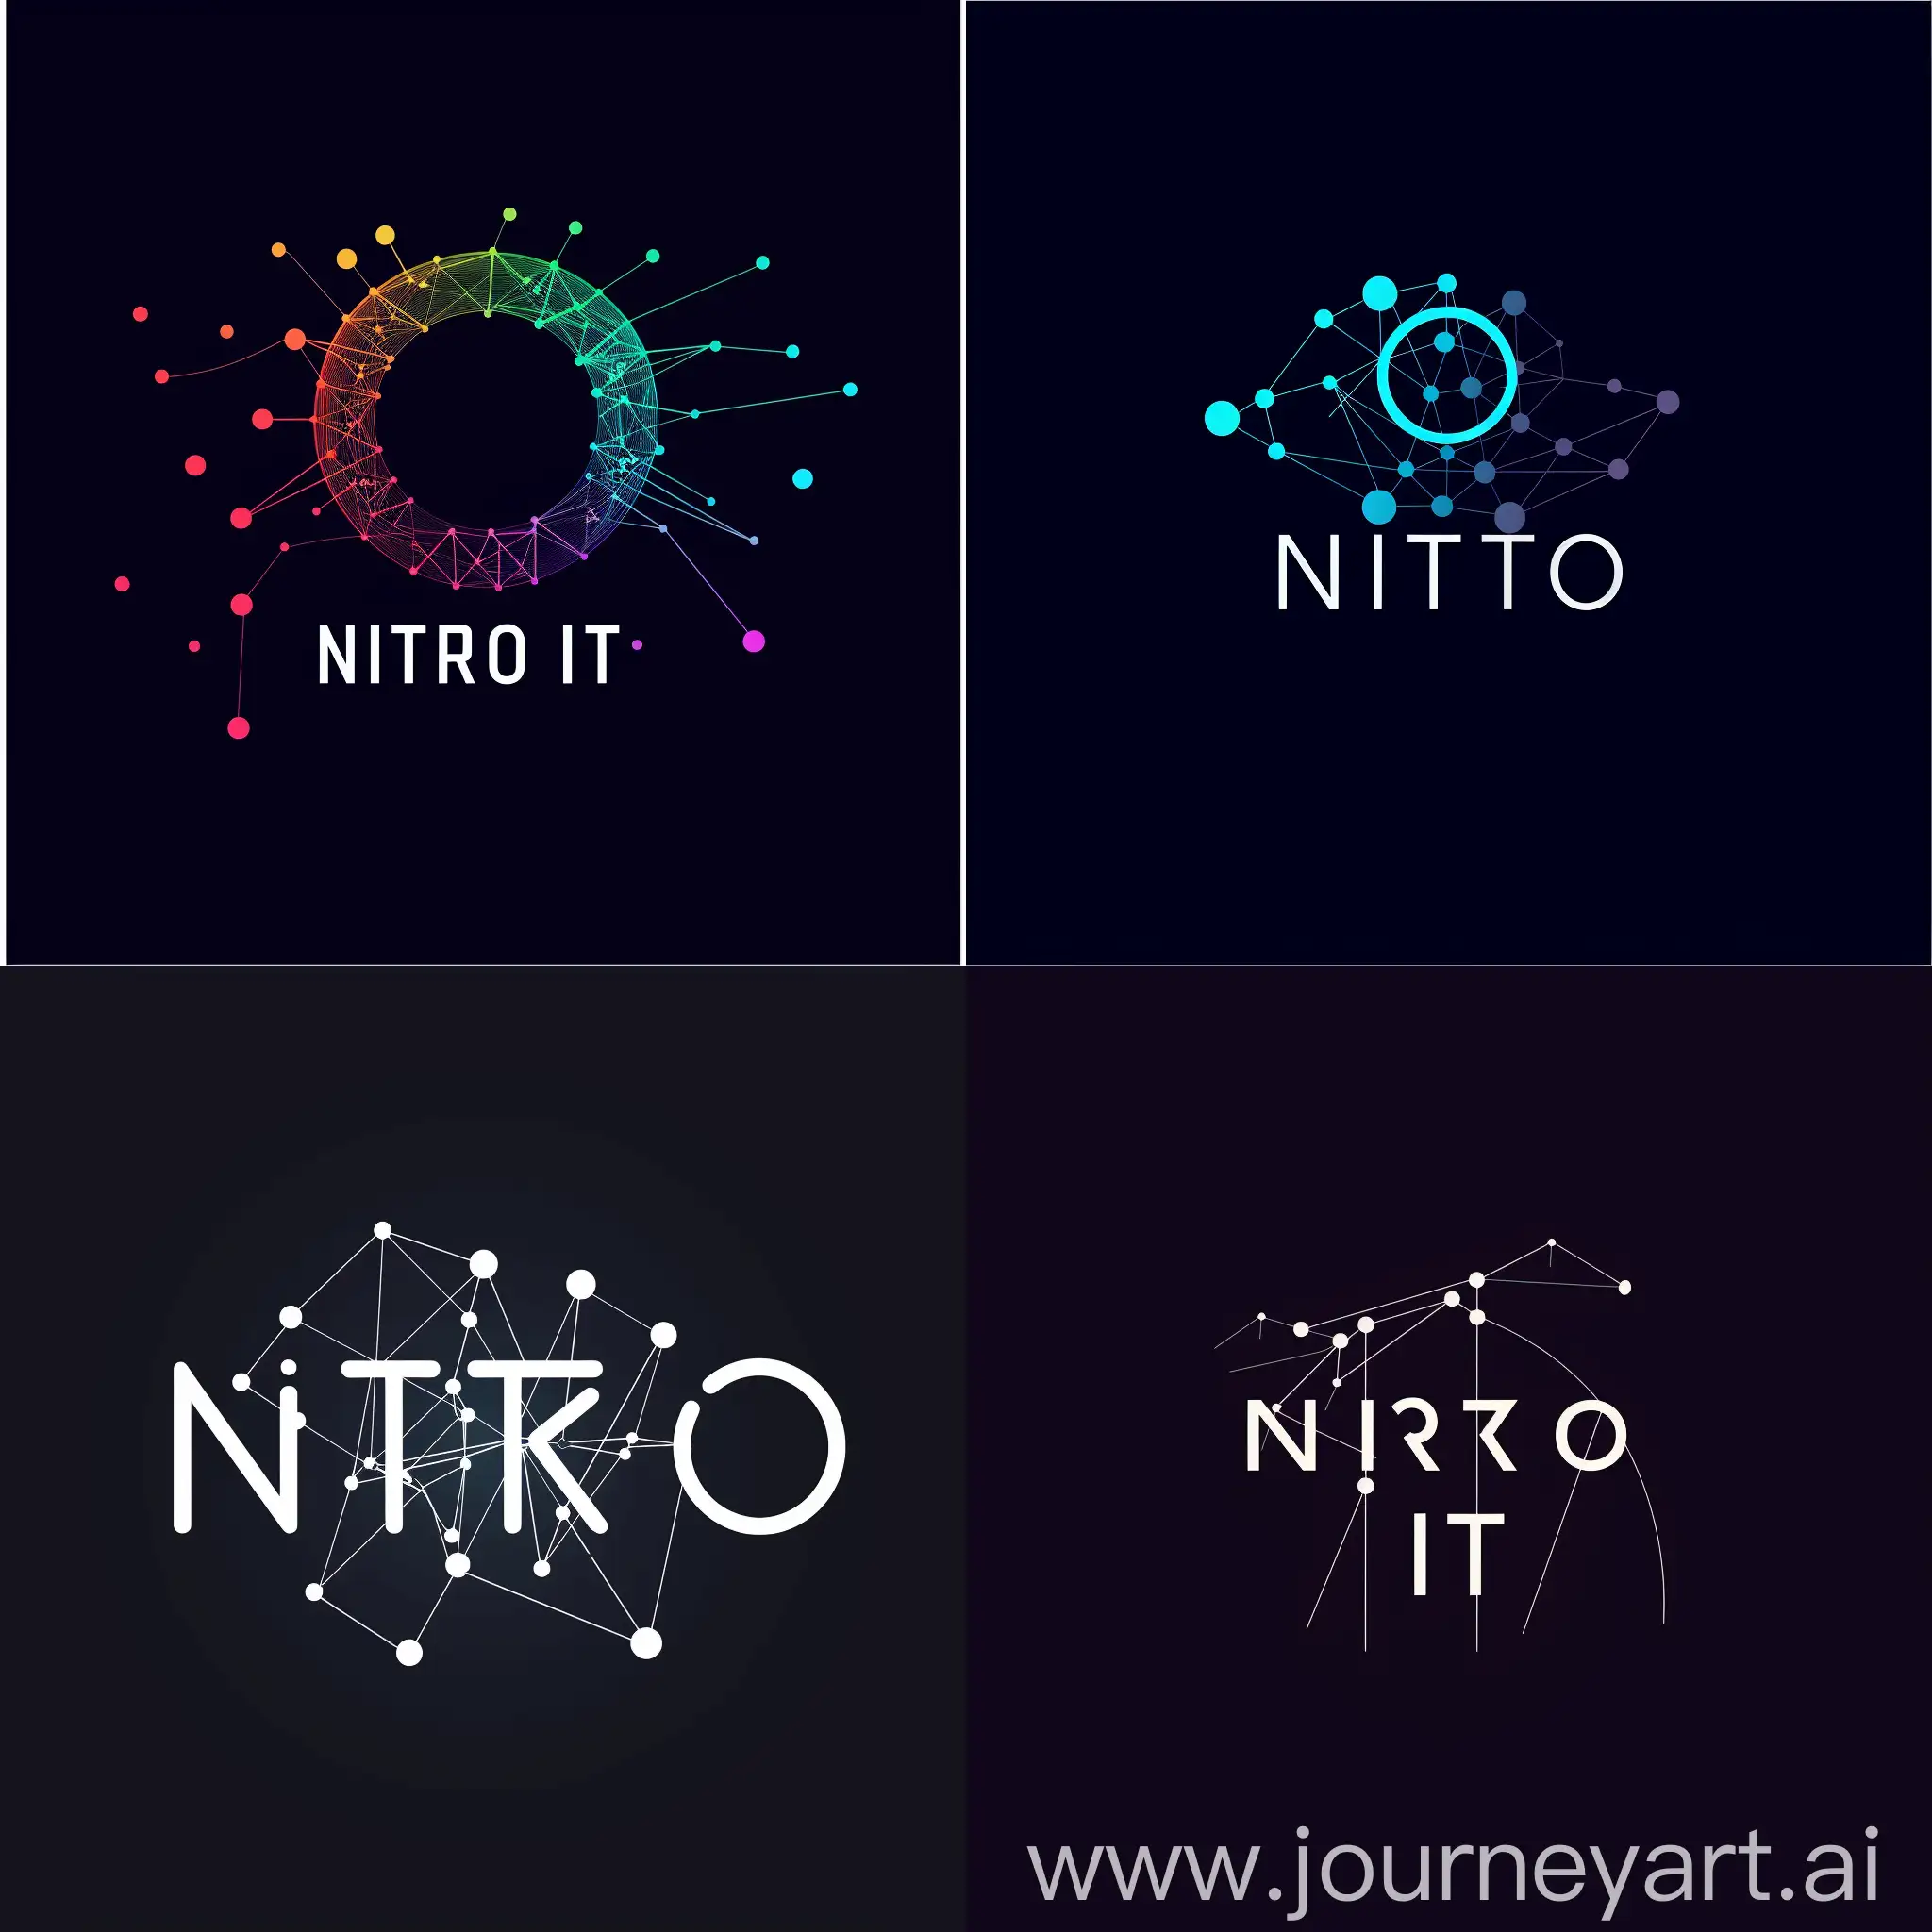 A simple logo called "Nitro IT" with the network logo instead of the word "O".